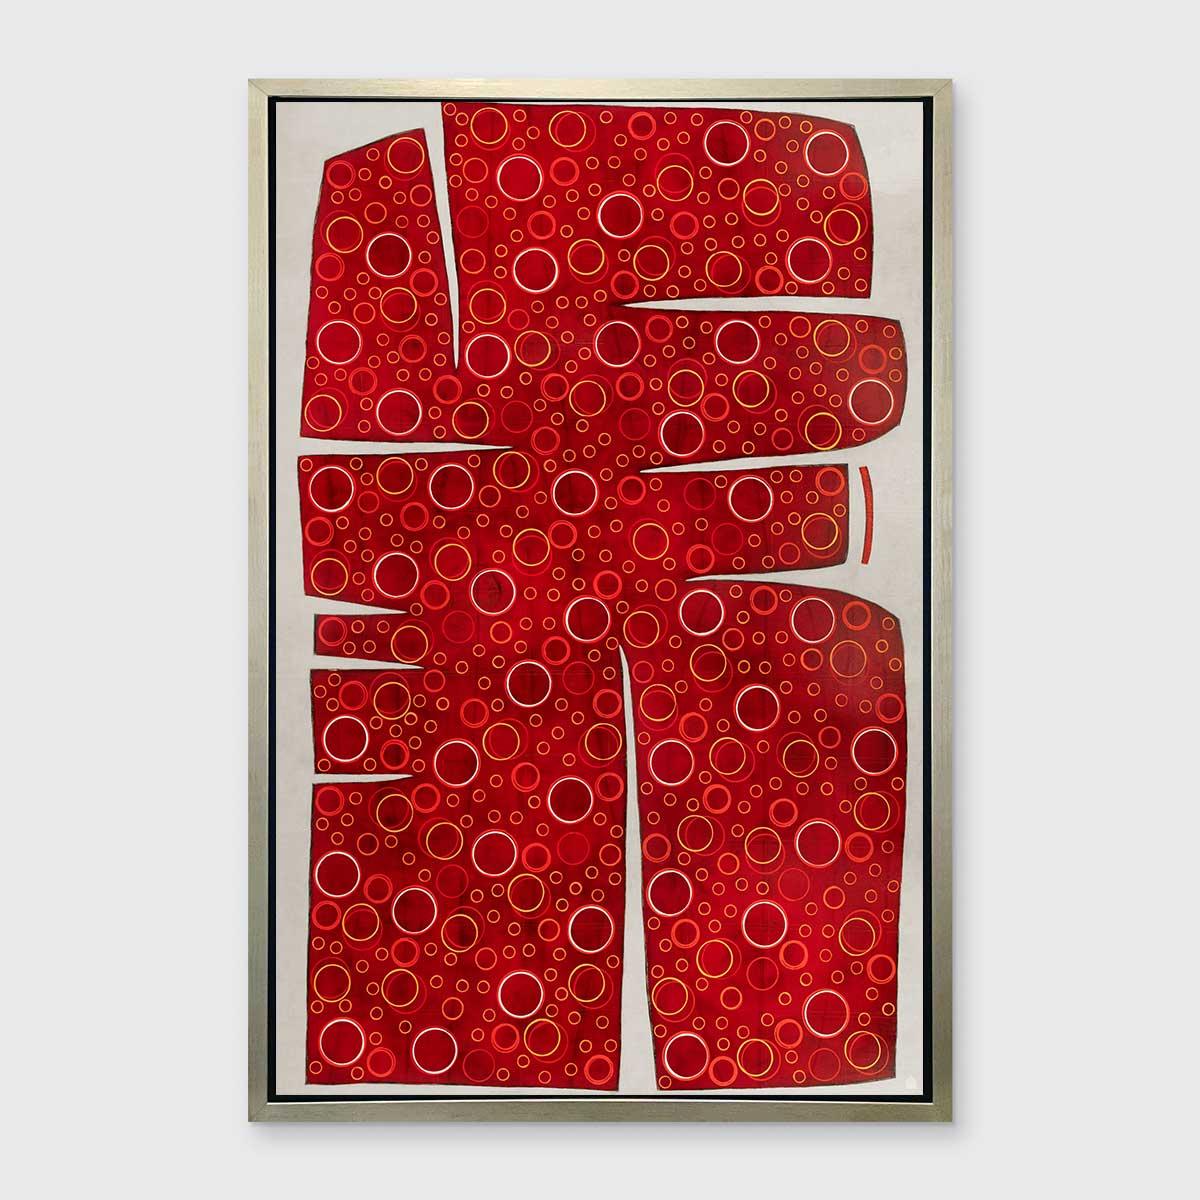 This abstract Limited Edition giclee print by Sofie Swann features an organic abstract red shape that covers almost the entire canvas, leaving a small border of off-white around it. The shape is a deep red hue, and filled with near-perfect outlines